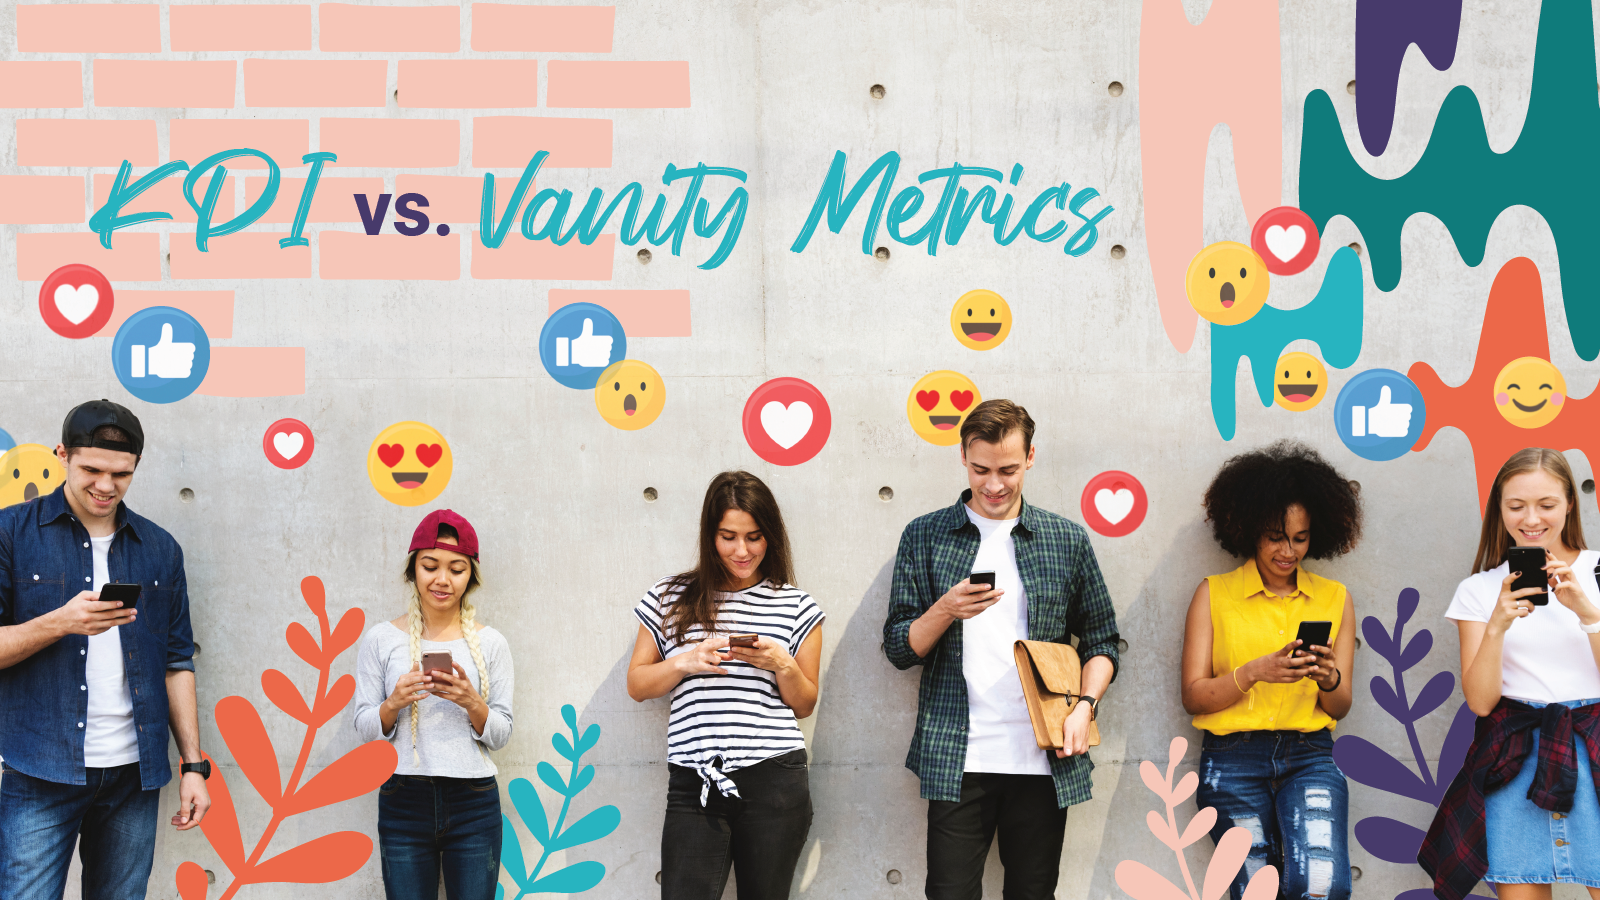 Six young adults, millennials, and gen Zers lean aginst a concrete wall while on their phones with social icons floating above them "KPI vs. Vanity Metrics"